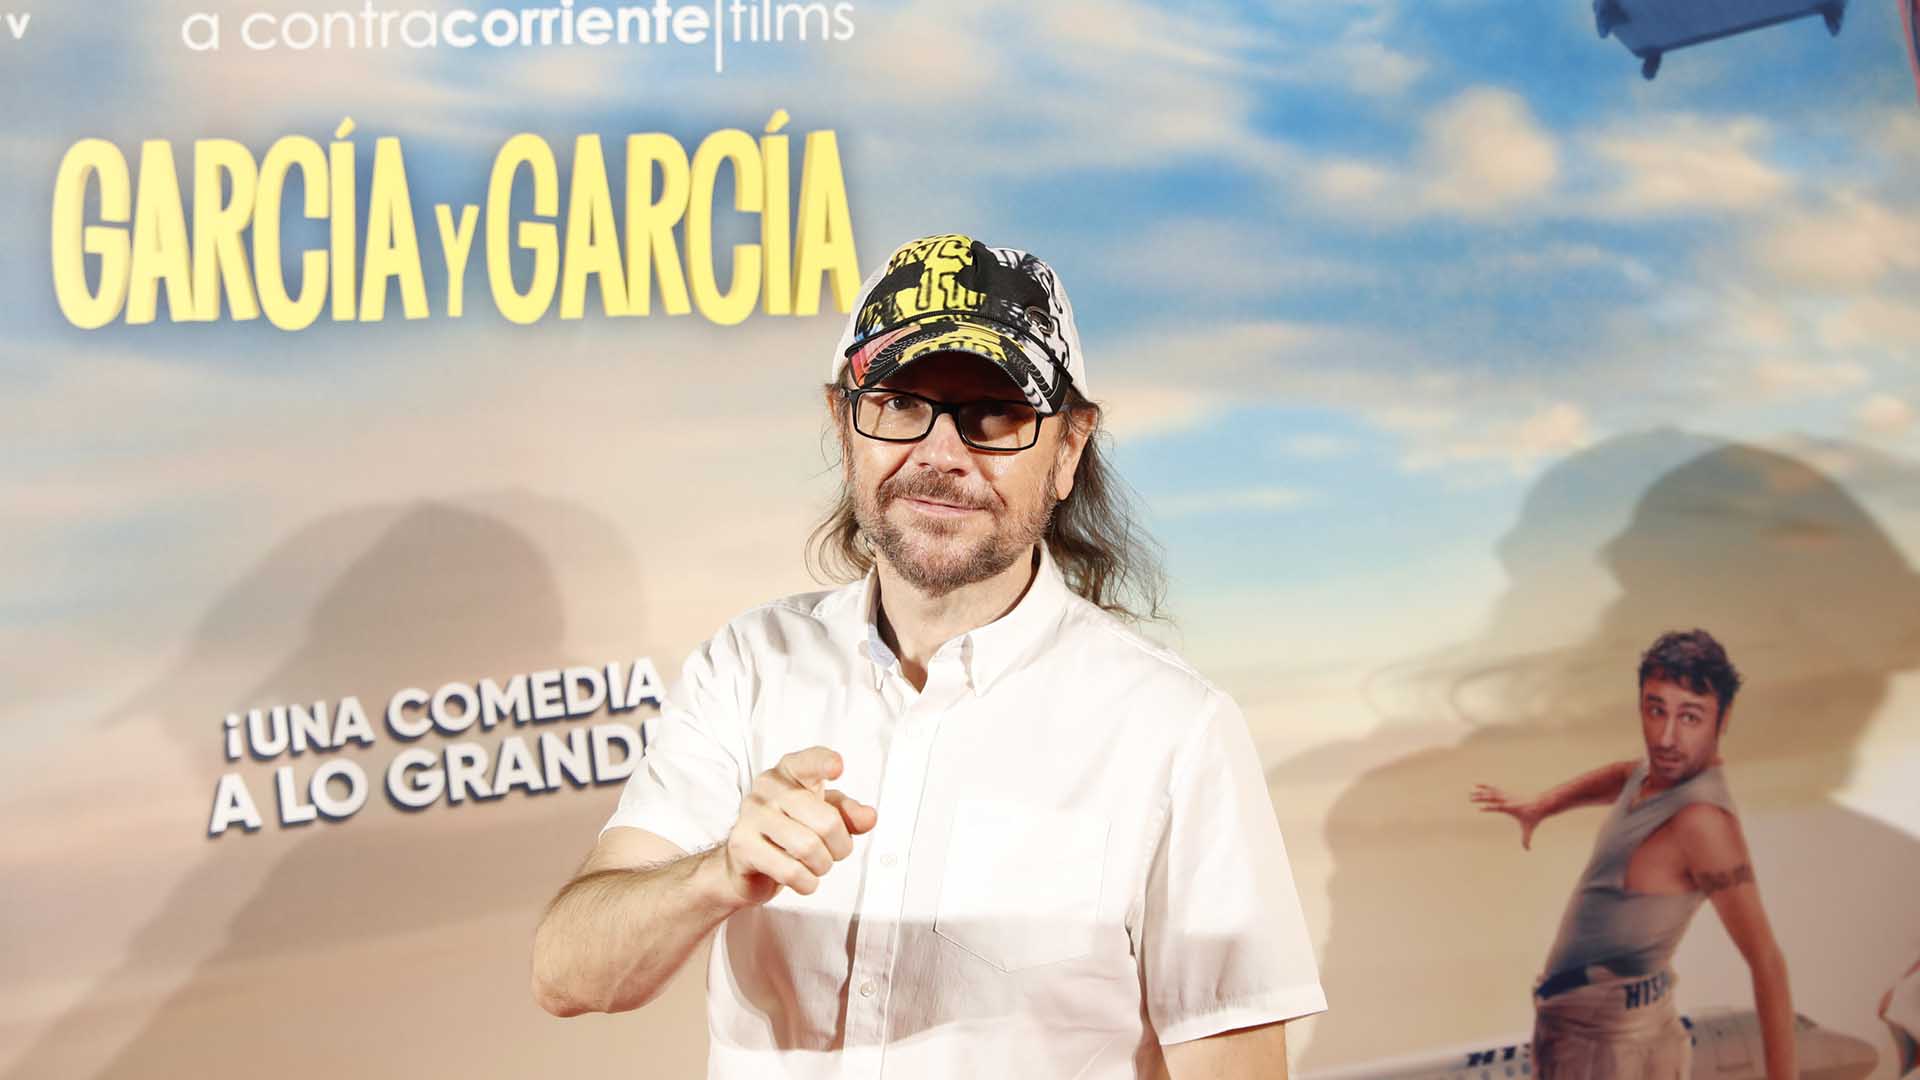 Actor Santiago Segura during the photocall of the movie '' Garcia Garcia '' in Madrid 25 August 2021